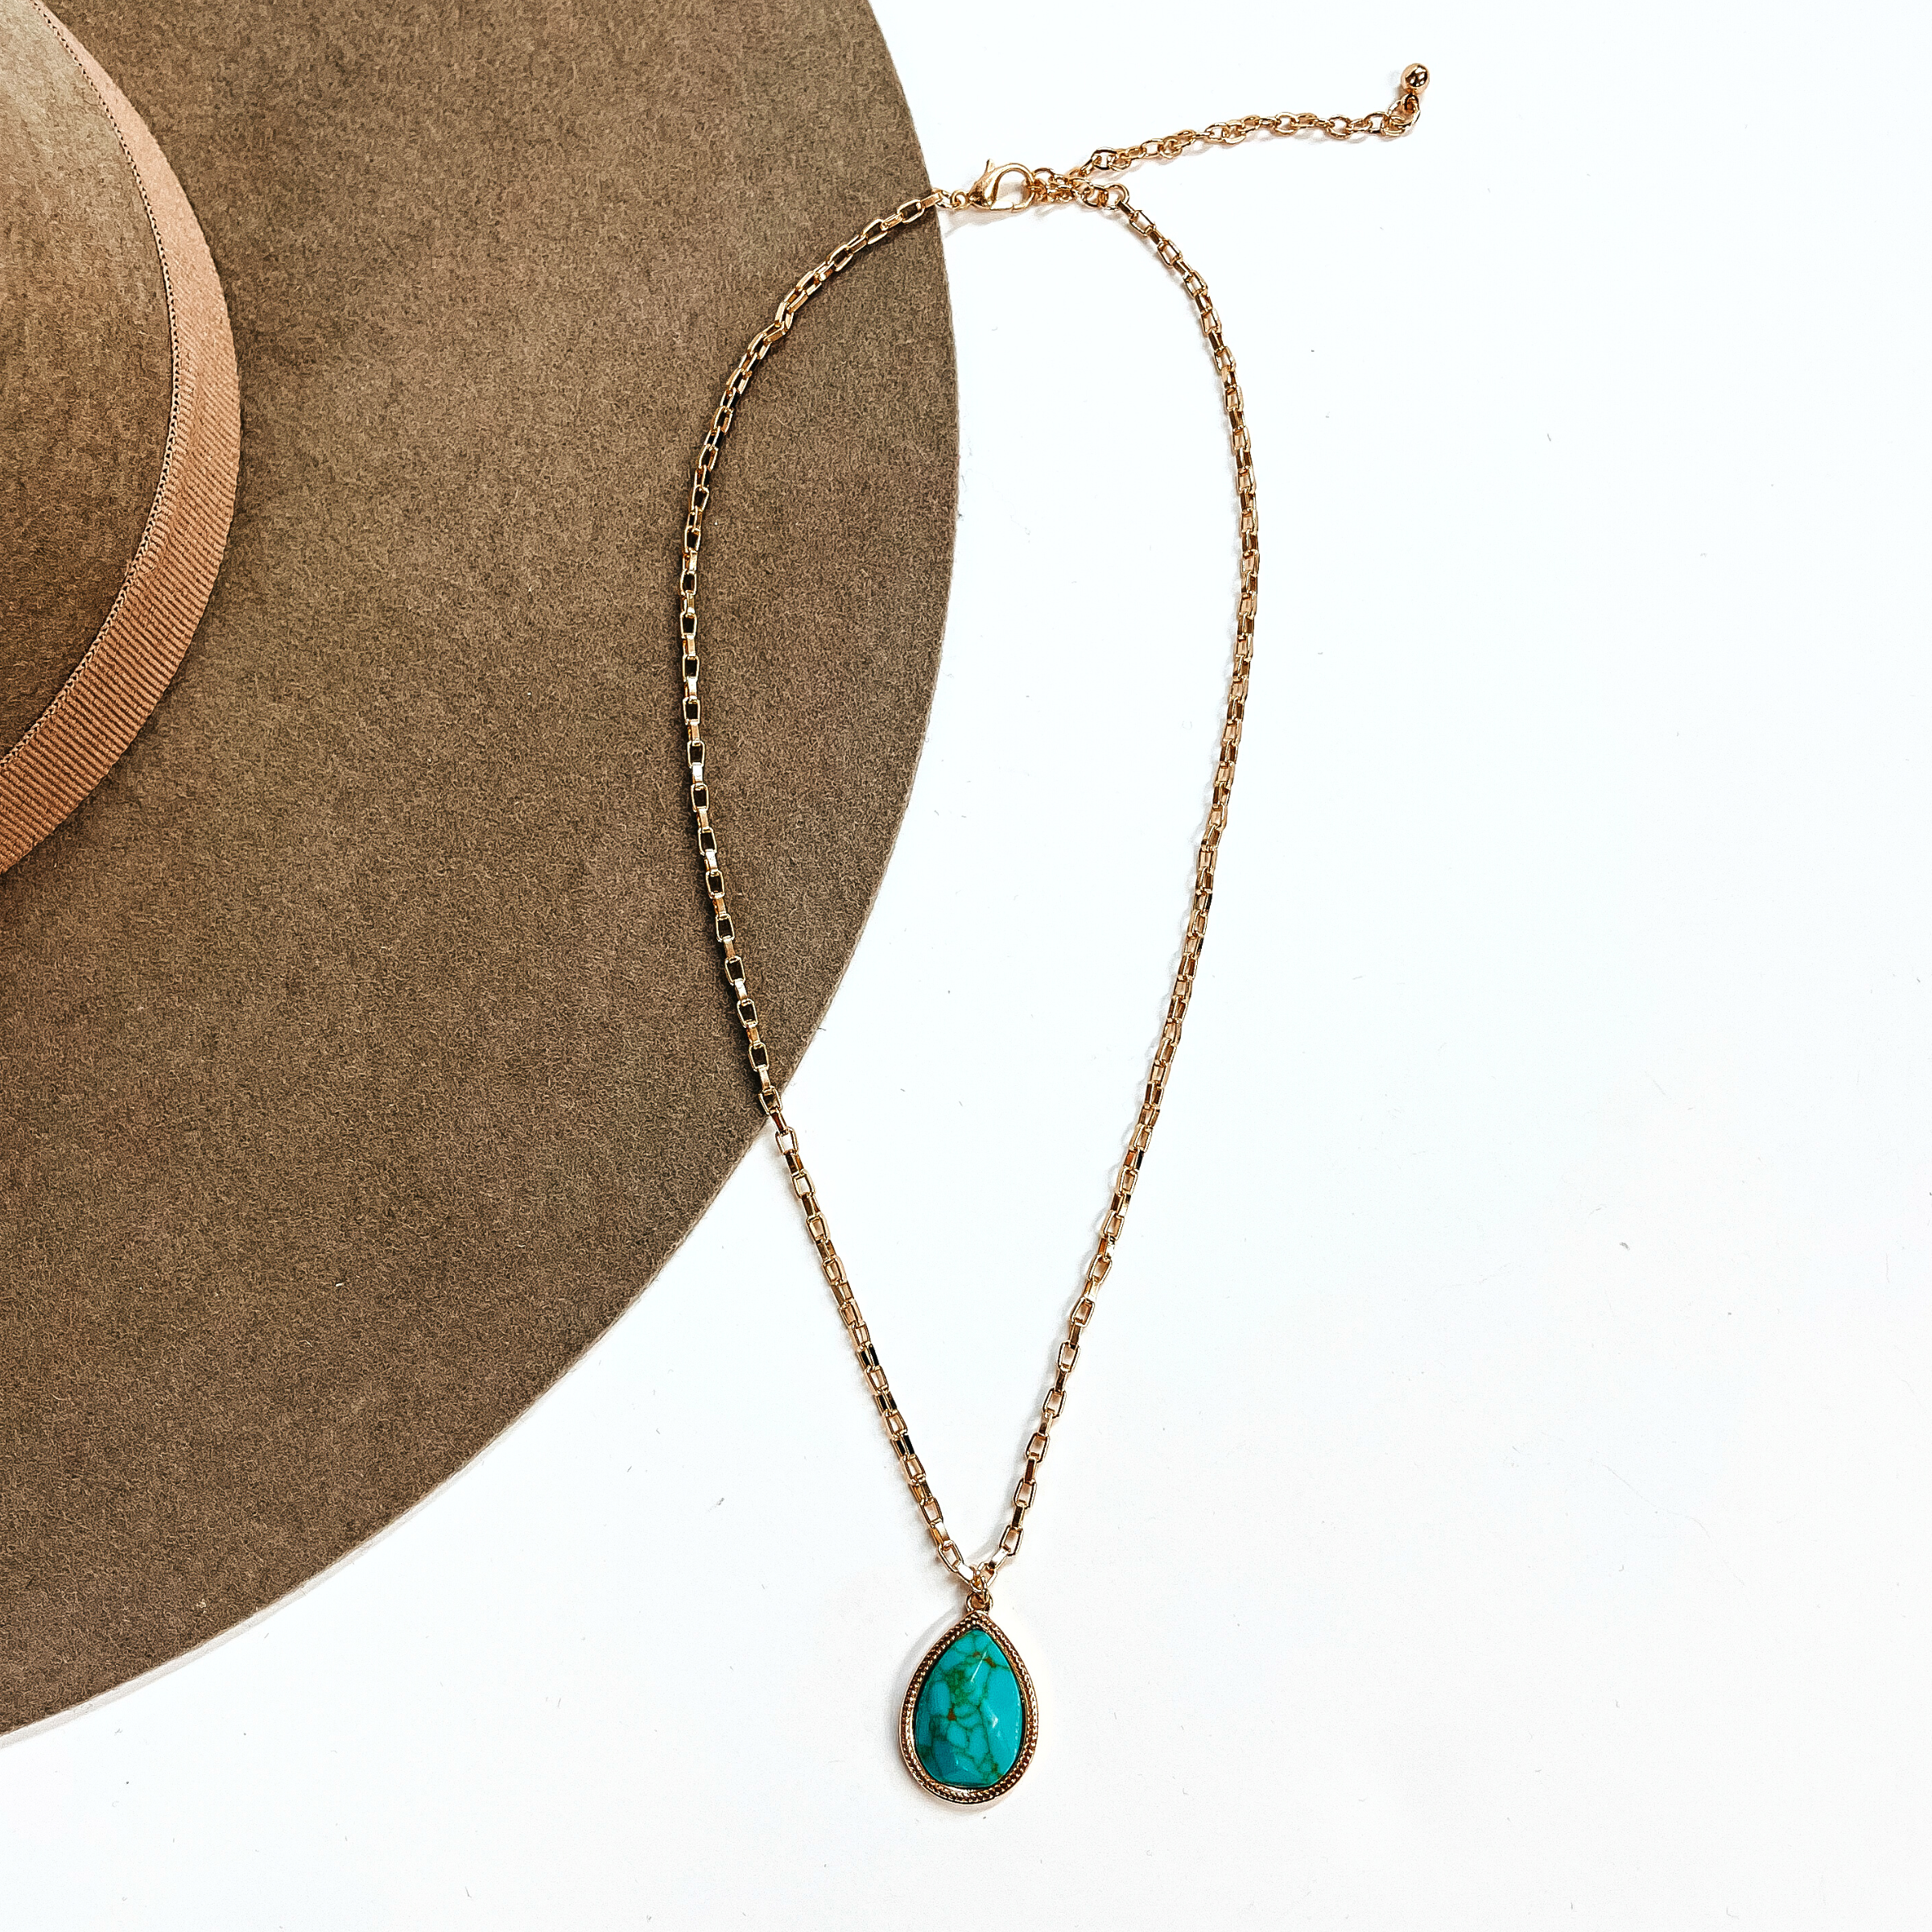 This is a thin gold tone chain necklace with a small teardrop pendant in the center. The  pendant has a turqouise stone shaped as a teardrop, the stone is in a gold setting. This  necklace is laying on a white background and on a light brown felt hat brim.